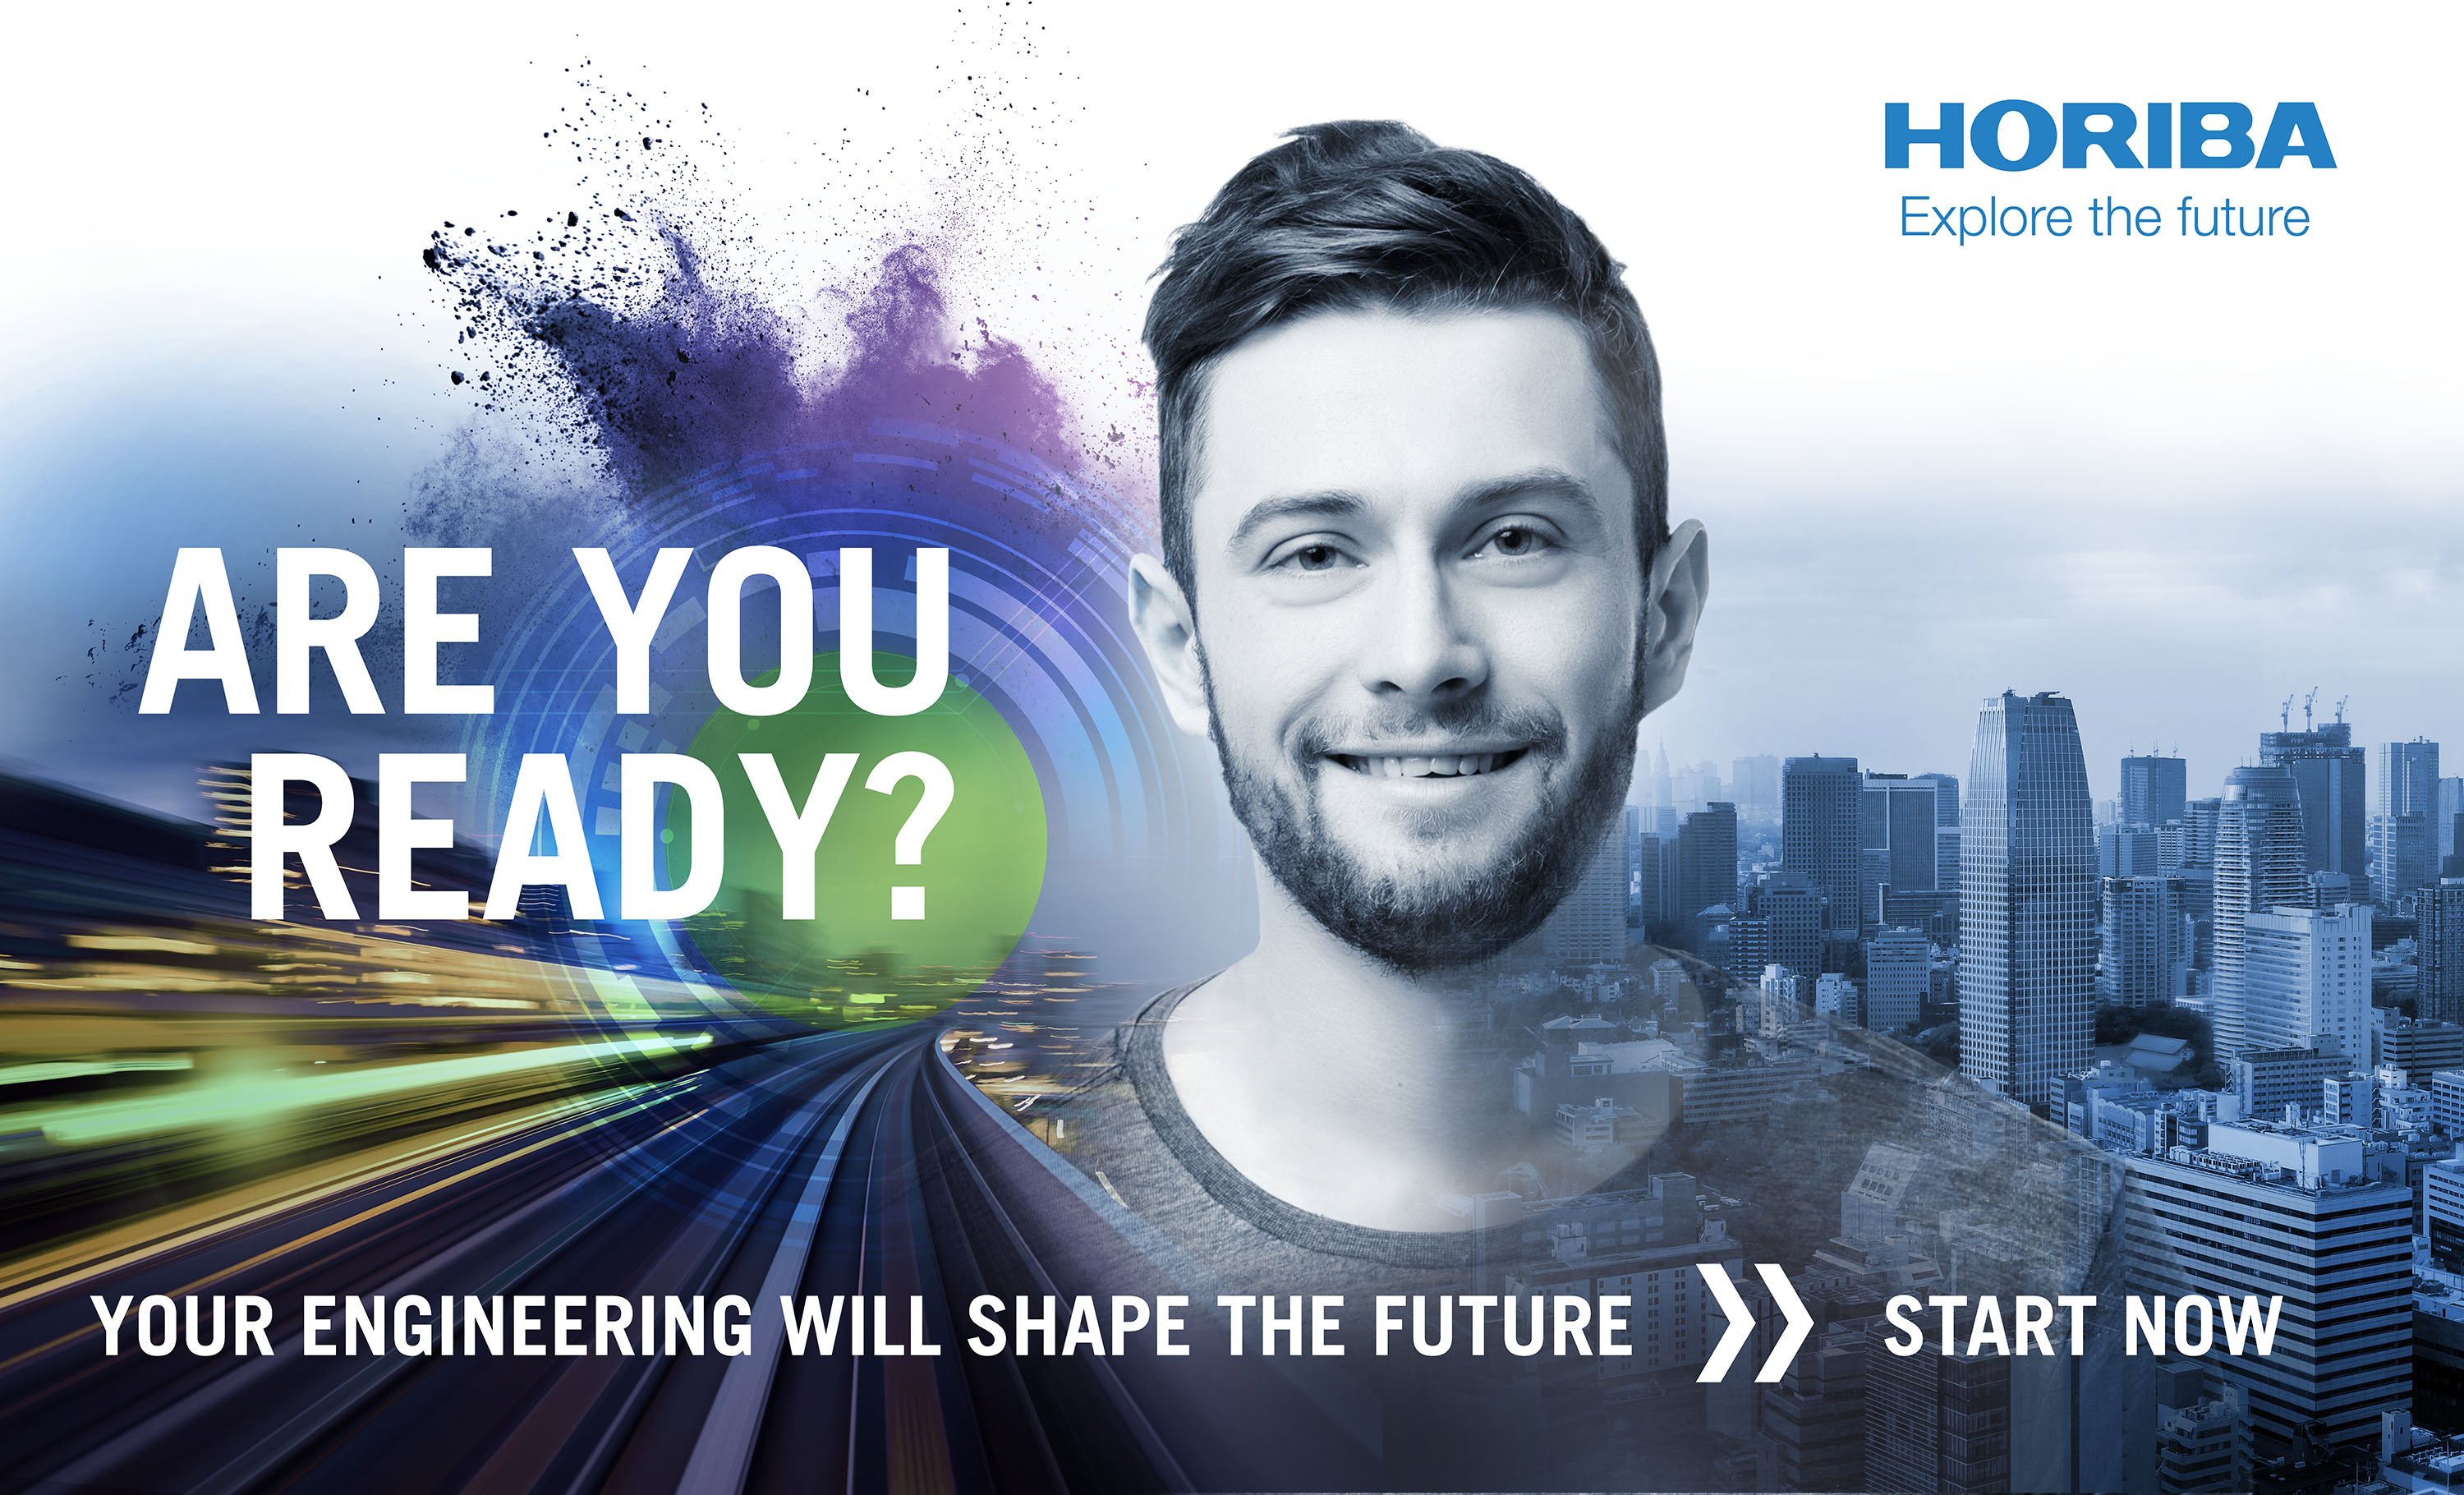 Recruiting concept, automotive test systems for HORIBA: DIE NEUDENKER® Agency, Darmstadt